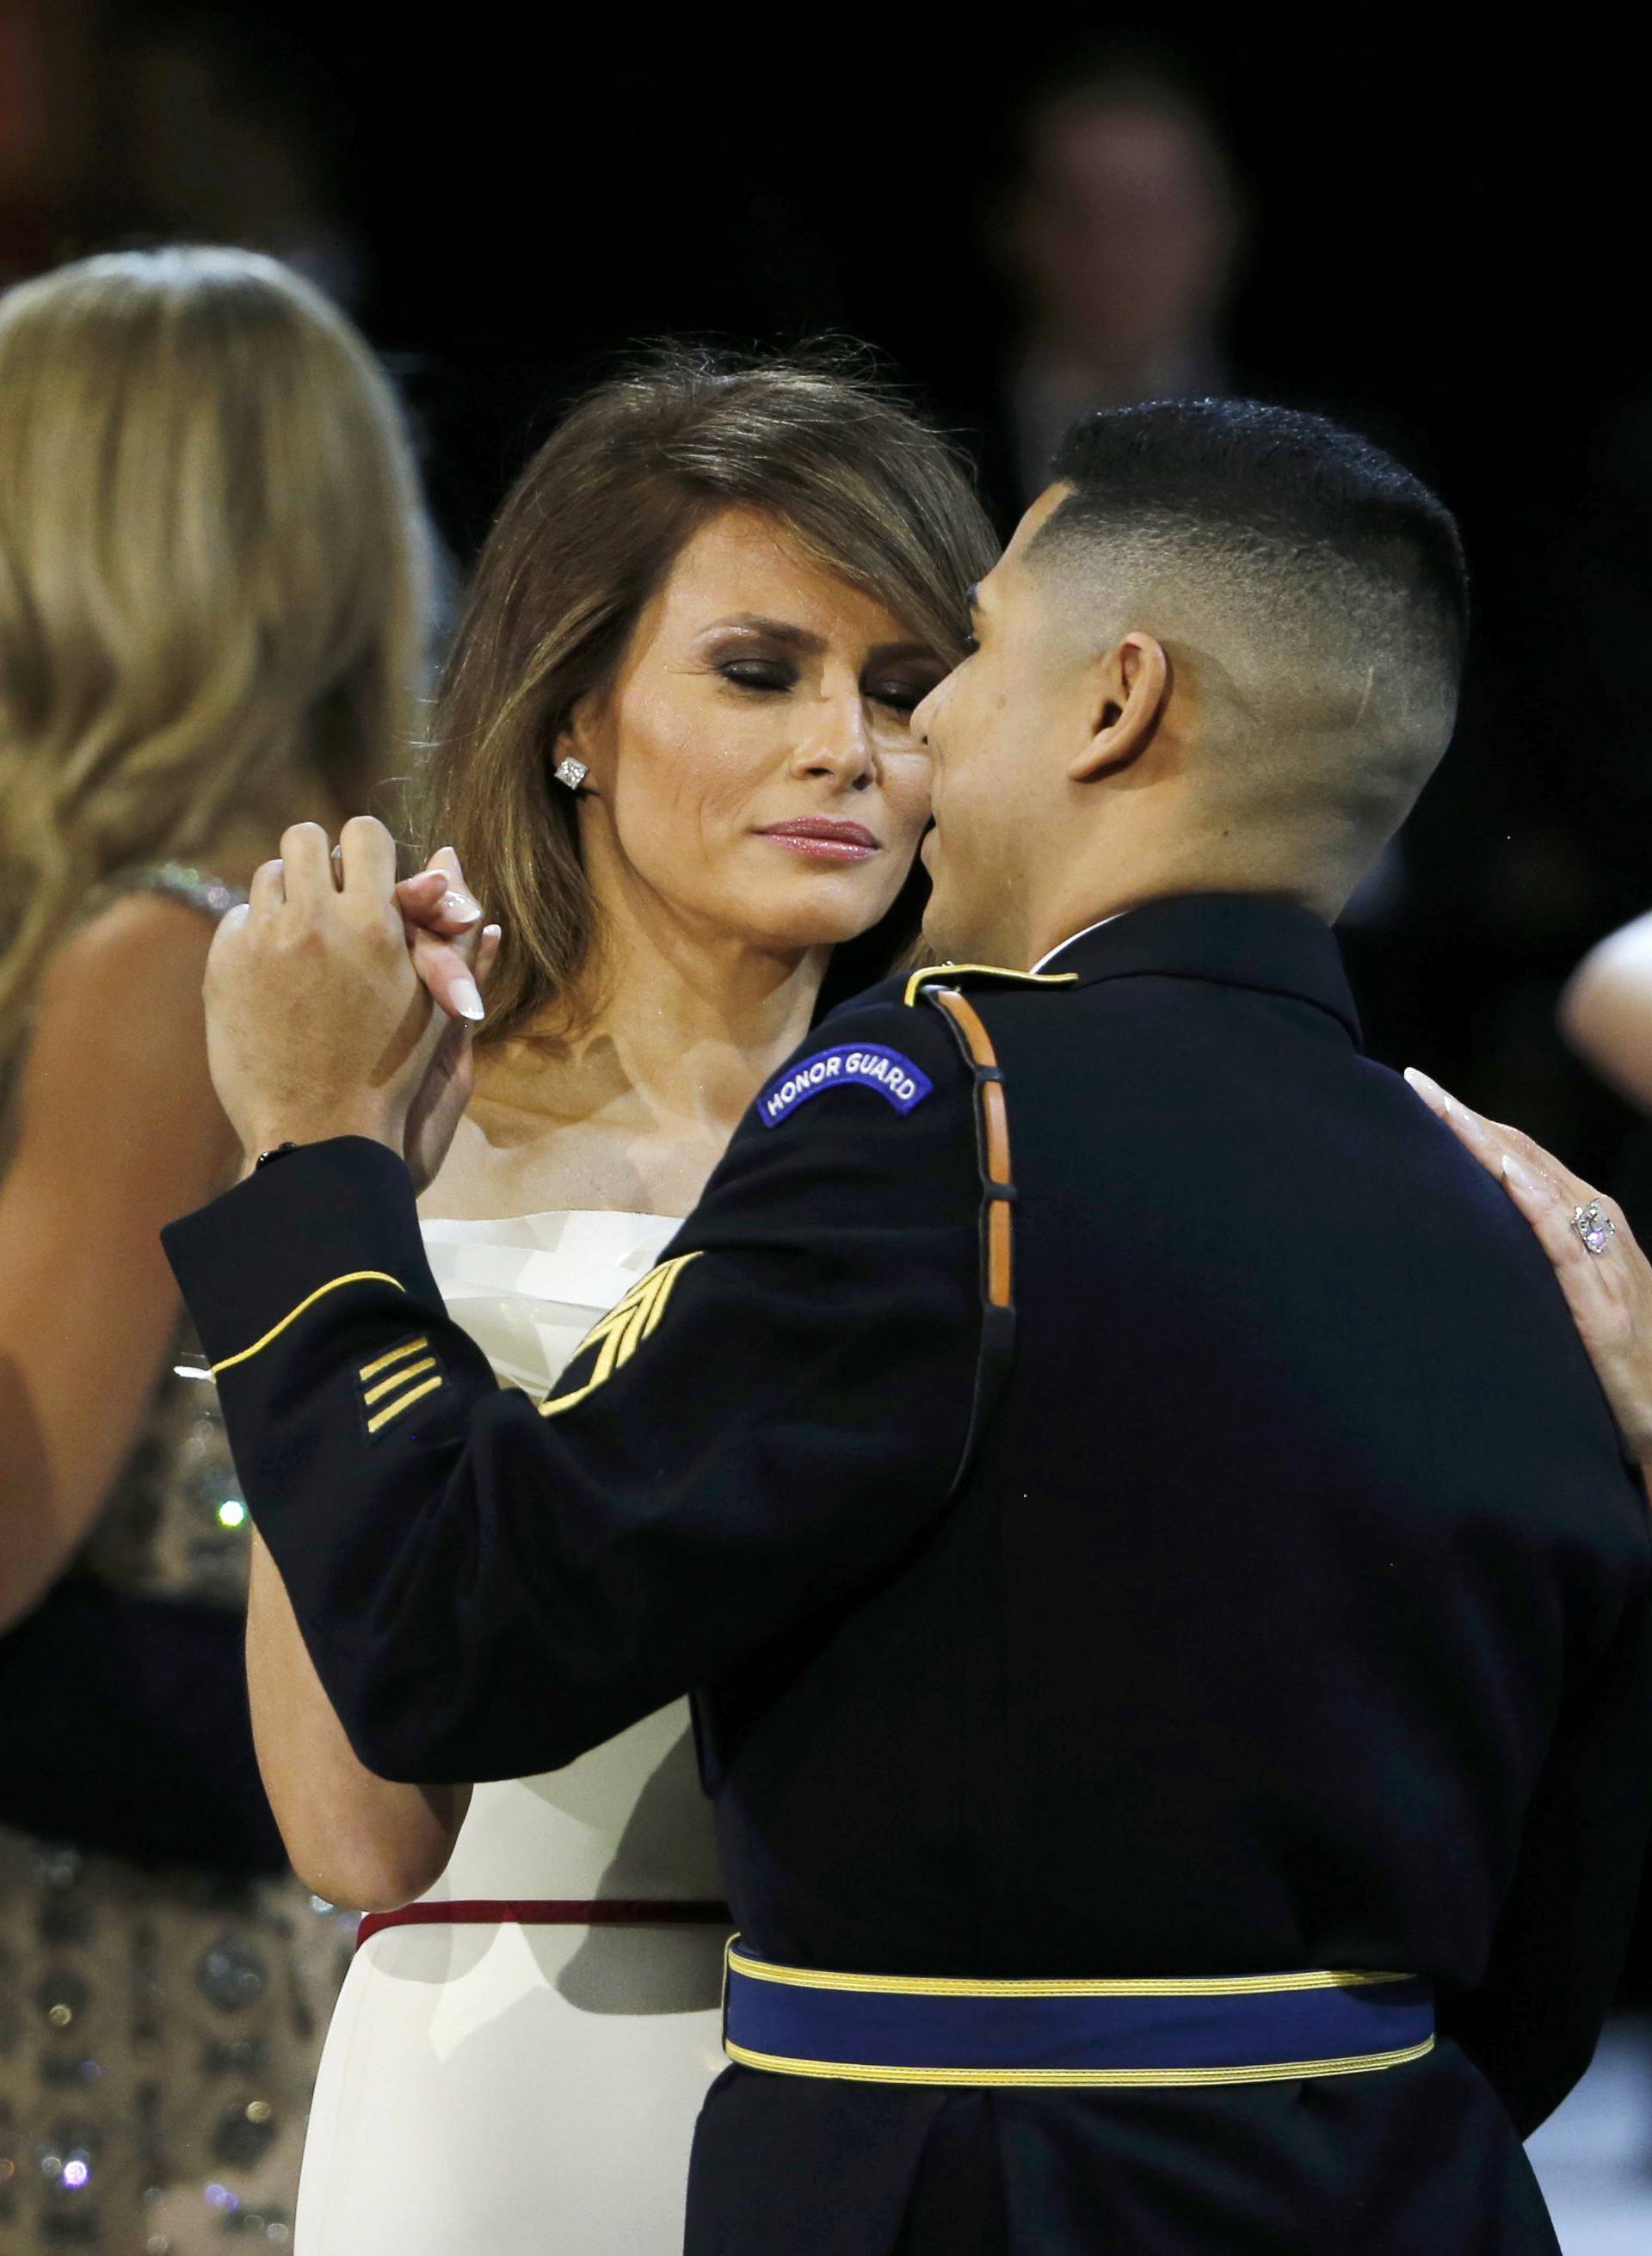 U.S. Navy Petty Officer Second Class Catherine Cartmell dances with President Trump as United States Army Staff Sergeant Jose A. Medina dances with First Lady Melania Trump during the Salute to Our Armed Services Ball in Washington